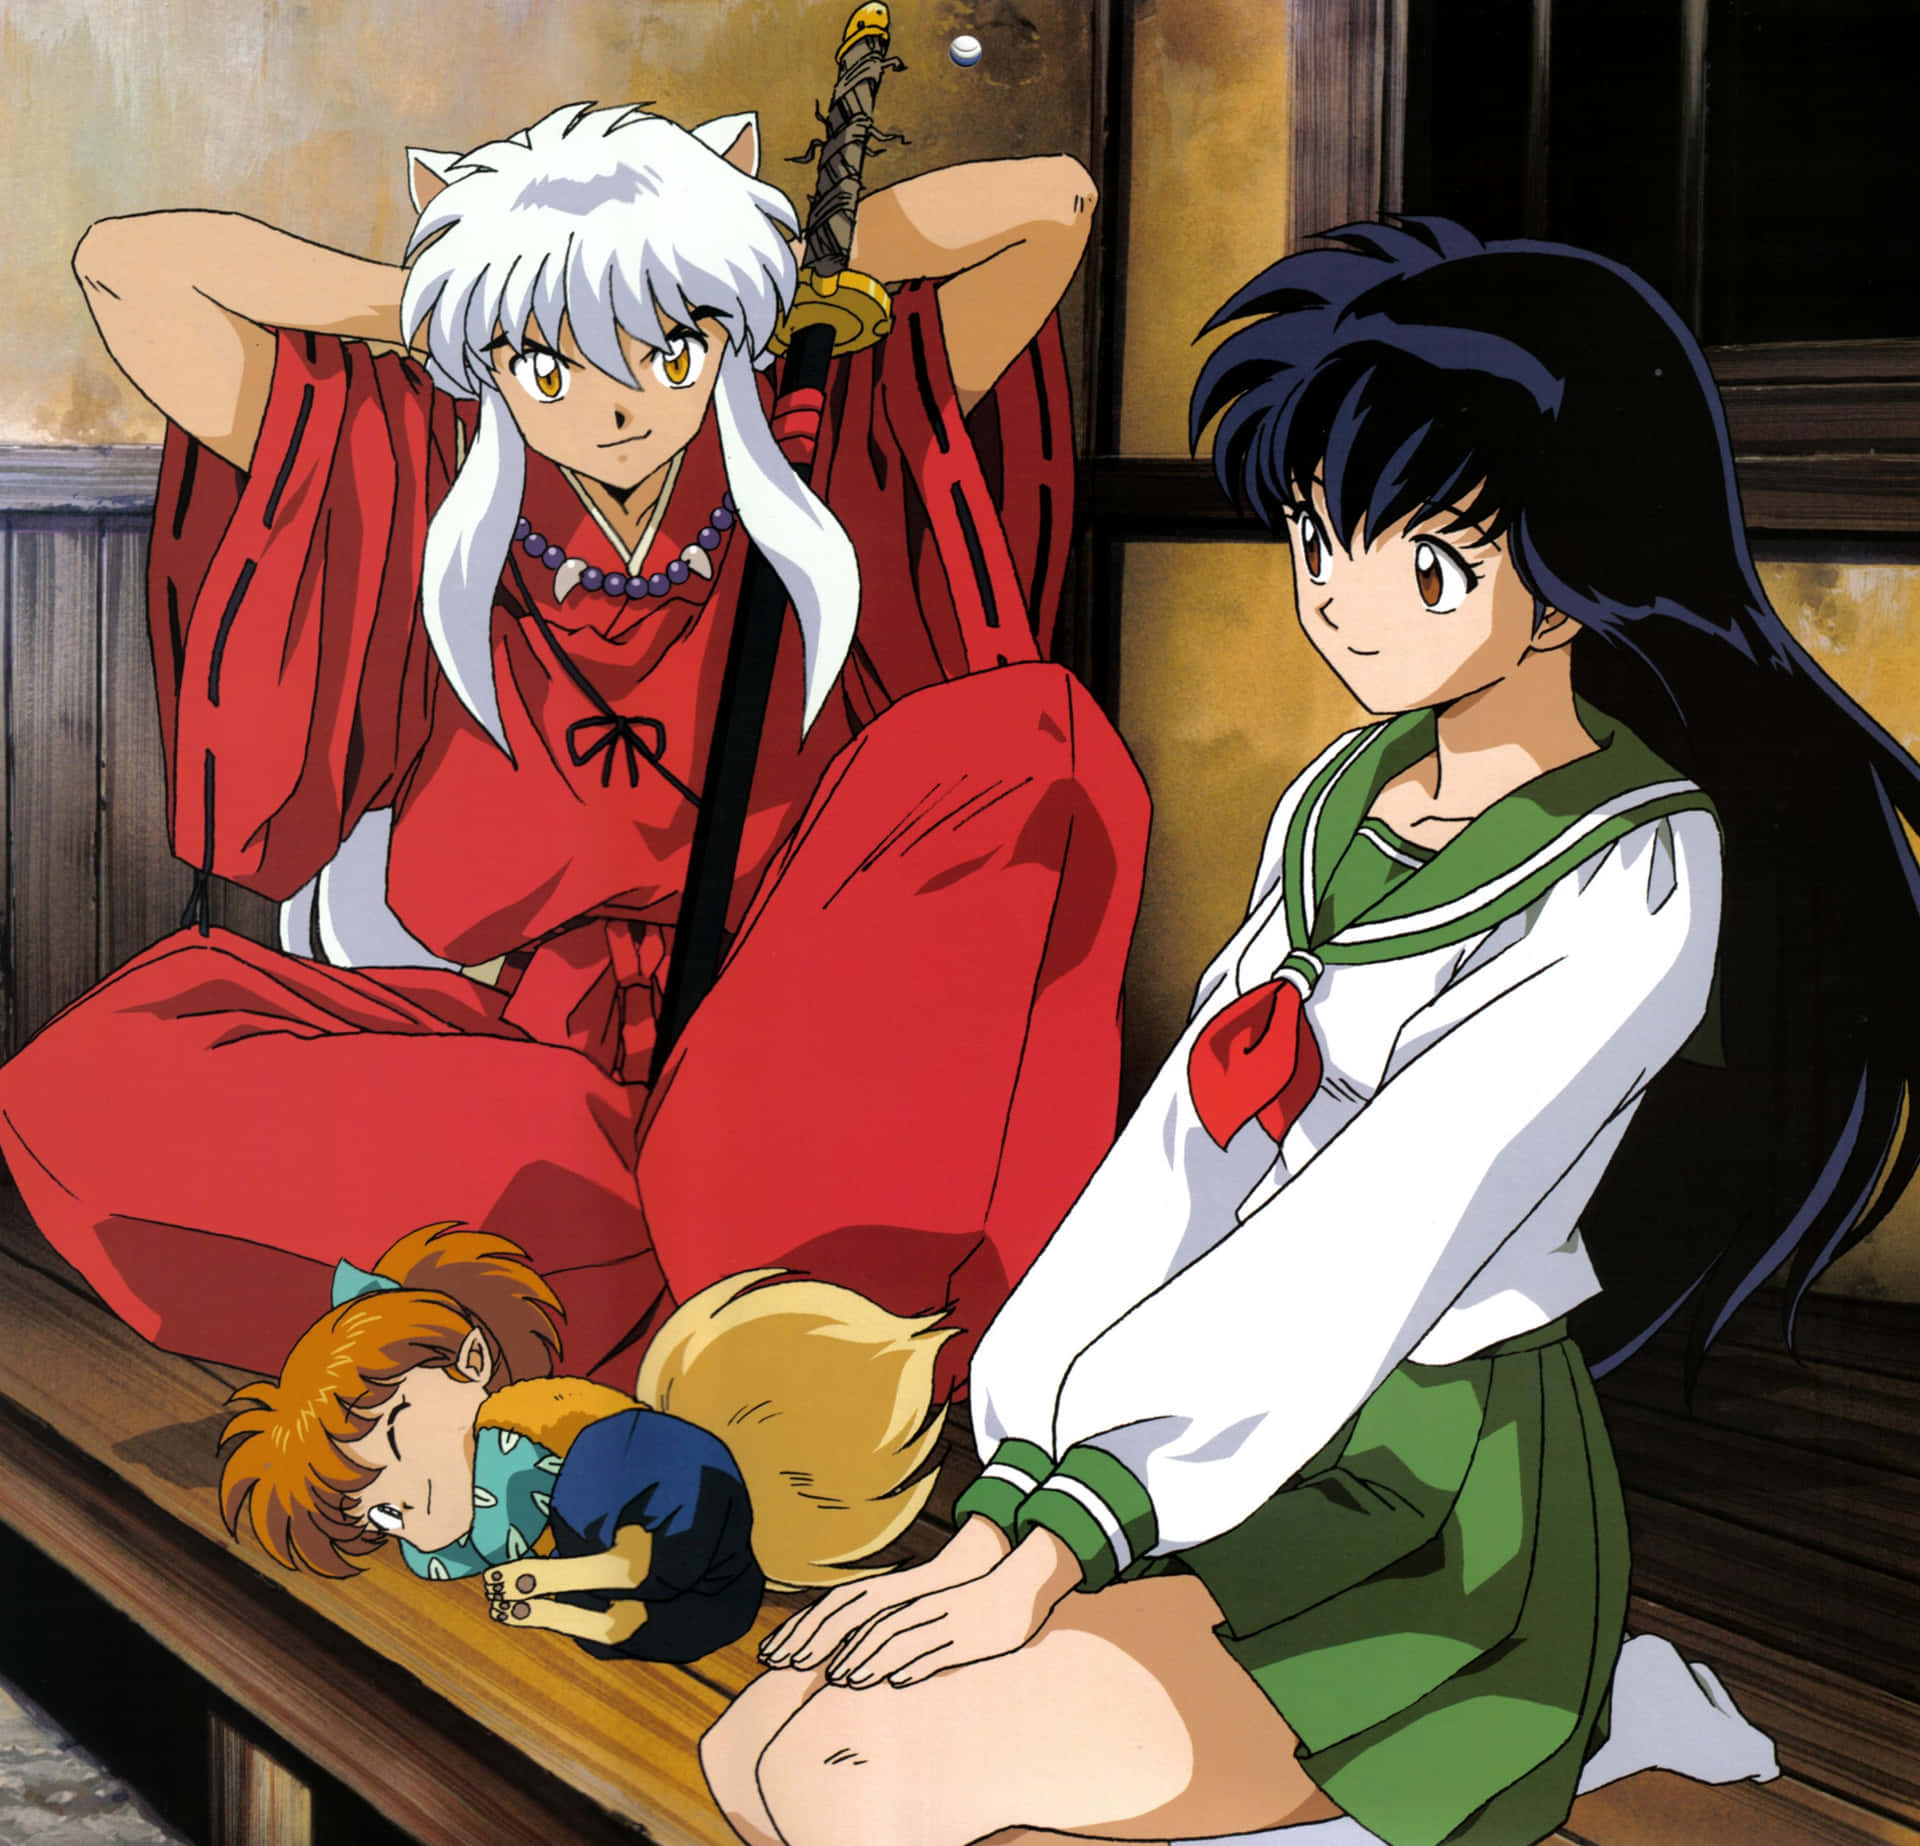 Caption: Inuyasha and Shippo bonding in a serene moment Wallpaper